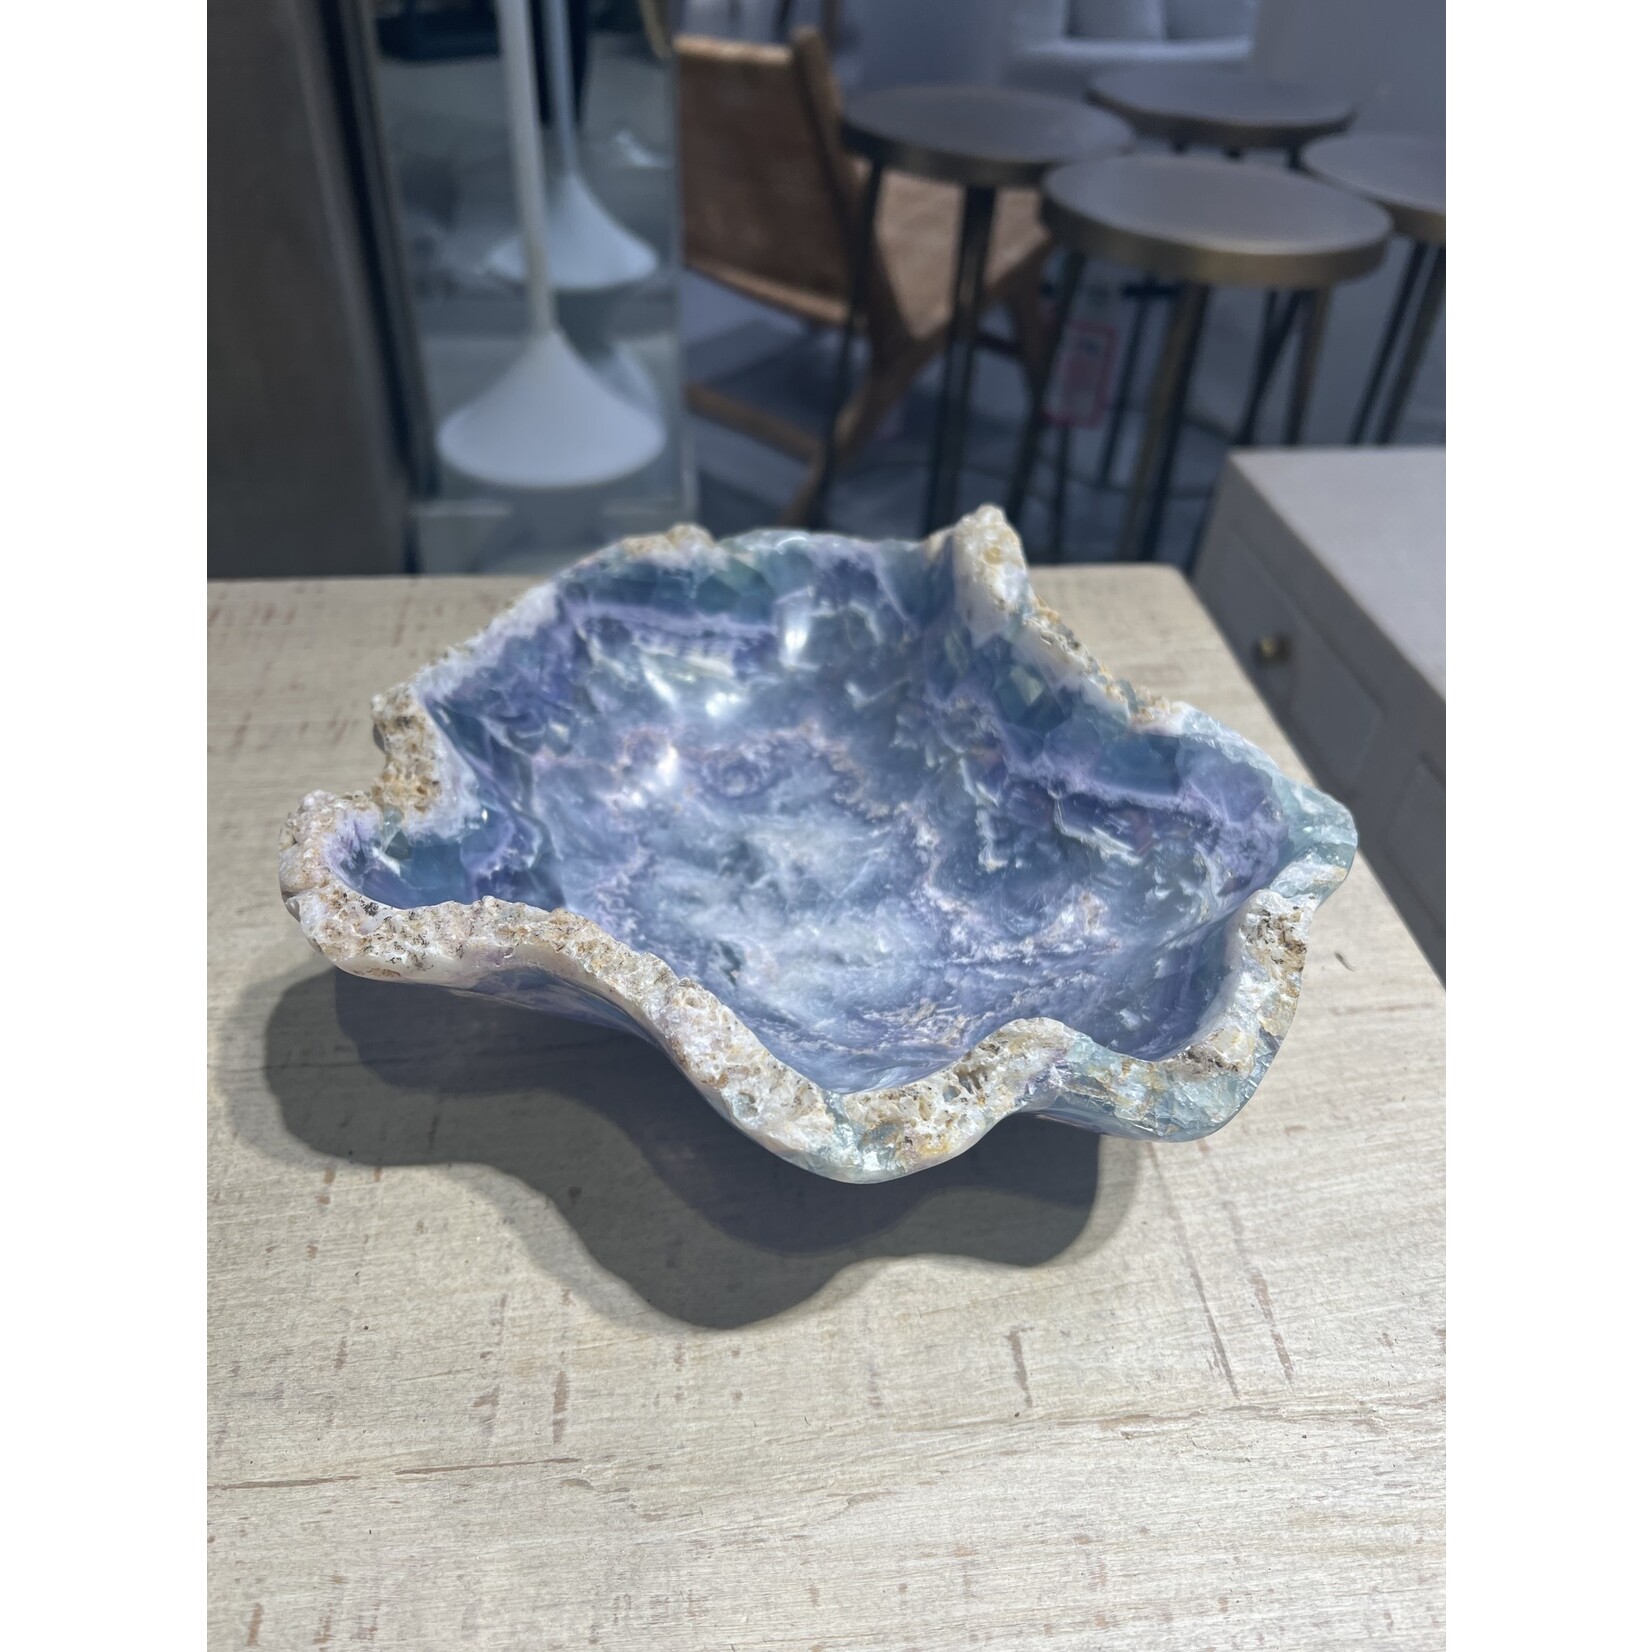 Outside The Box 9x3 Flourite Onyx Hand-Carved Bowl